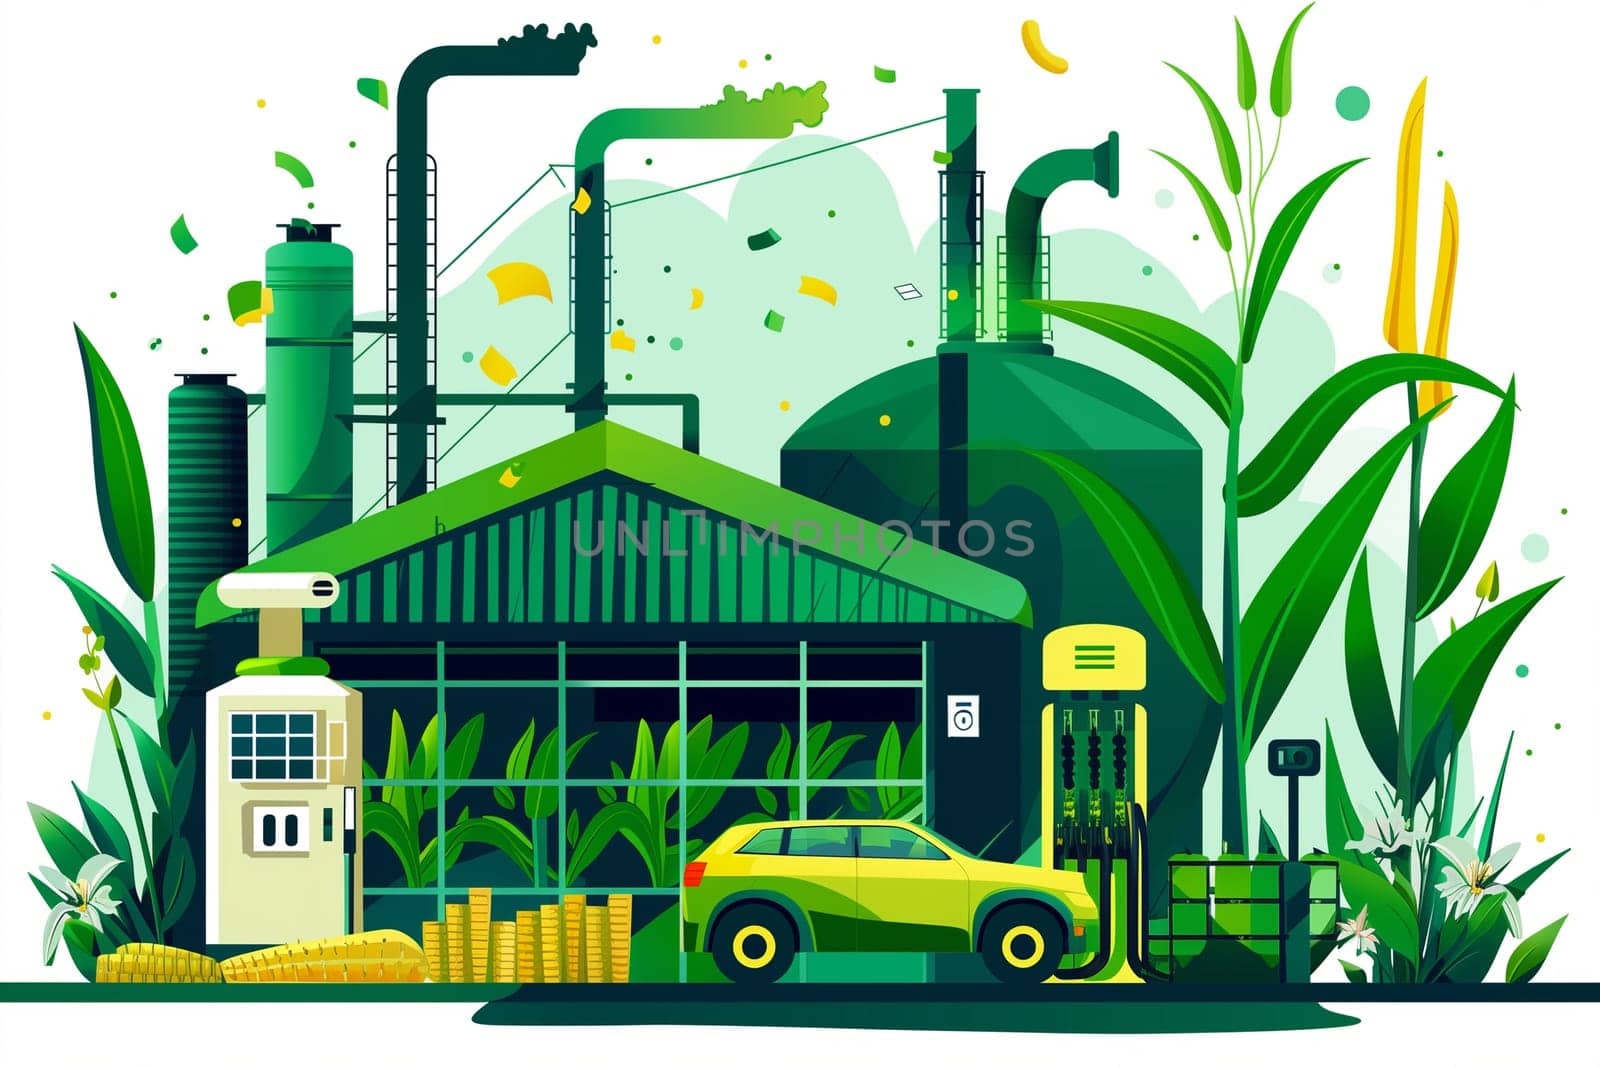 Eco-Friendly Biofuel Production Facility With Electric Car and Corn Ethanol by Sd28DimoN_1976